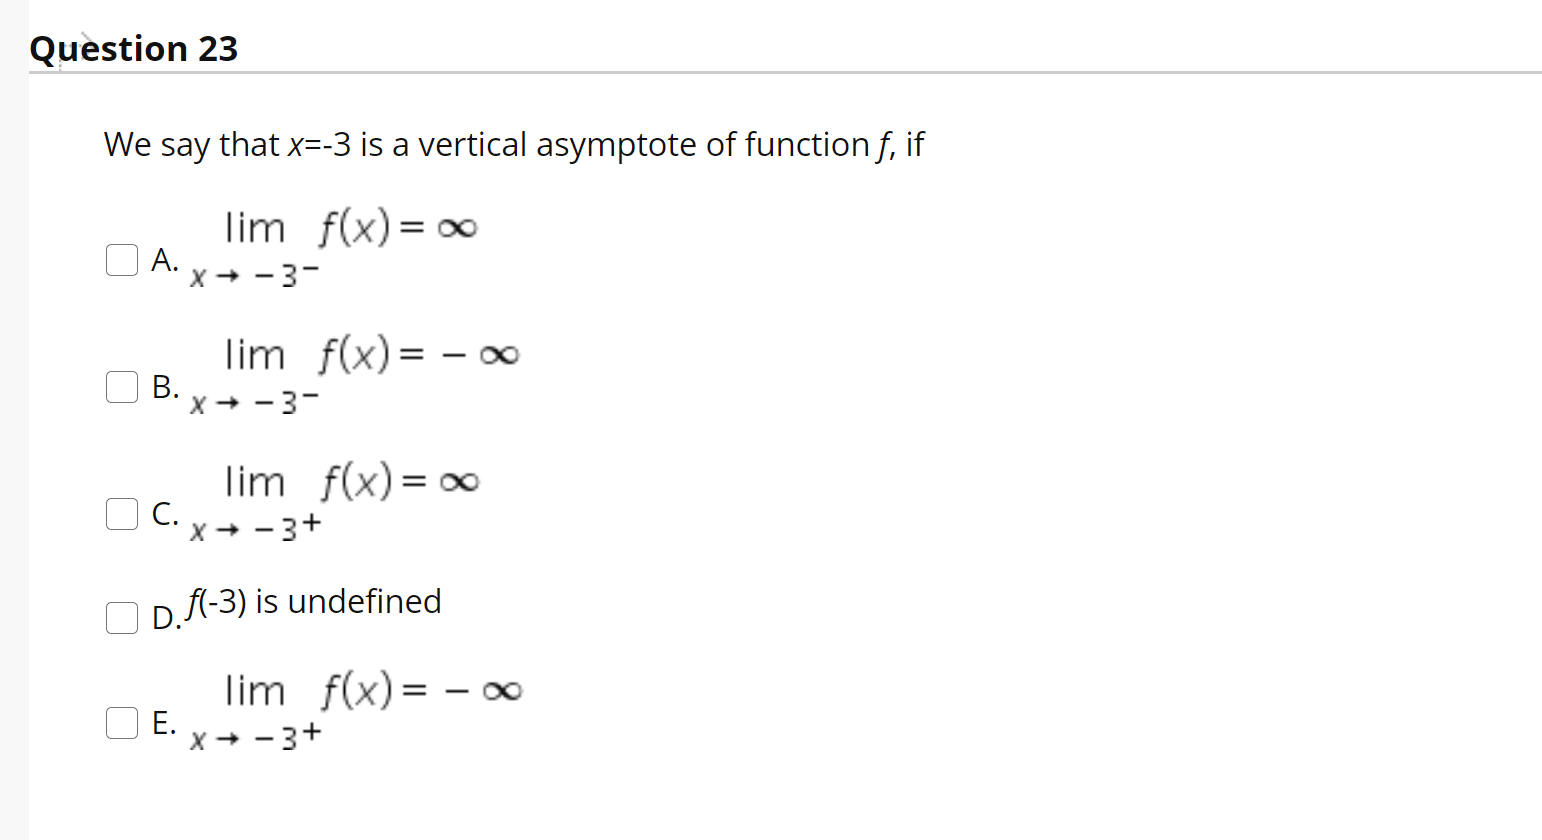 We say that x=-3 is a vertical asymptote of function f, if
lim f(x)= ∞
A.
X + -3-
lim f(x)= – ∞
В.
X+ -3-
lim f(x) = 0
С.
→ -3+
Df(-3) is undefined
